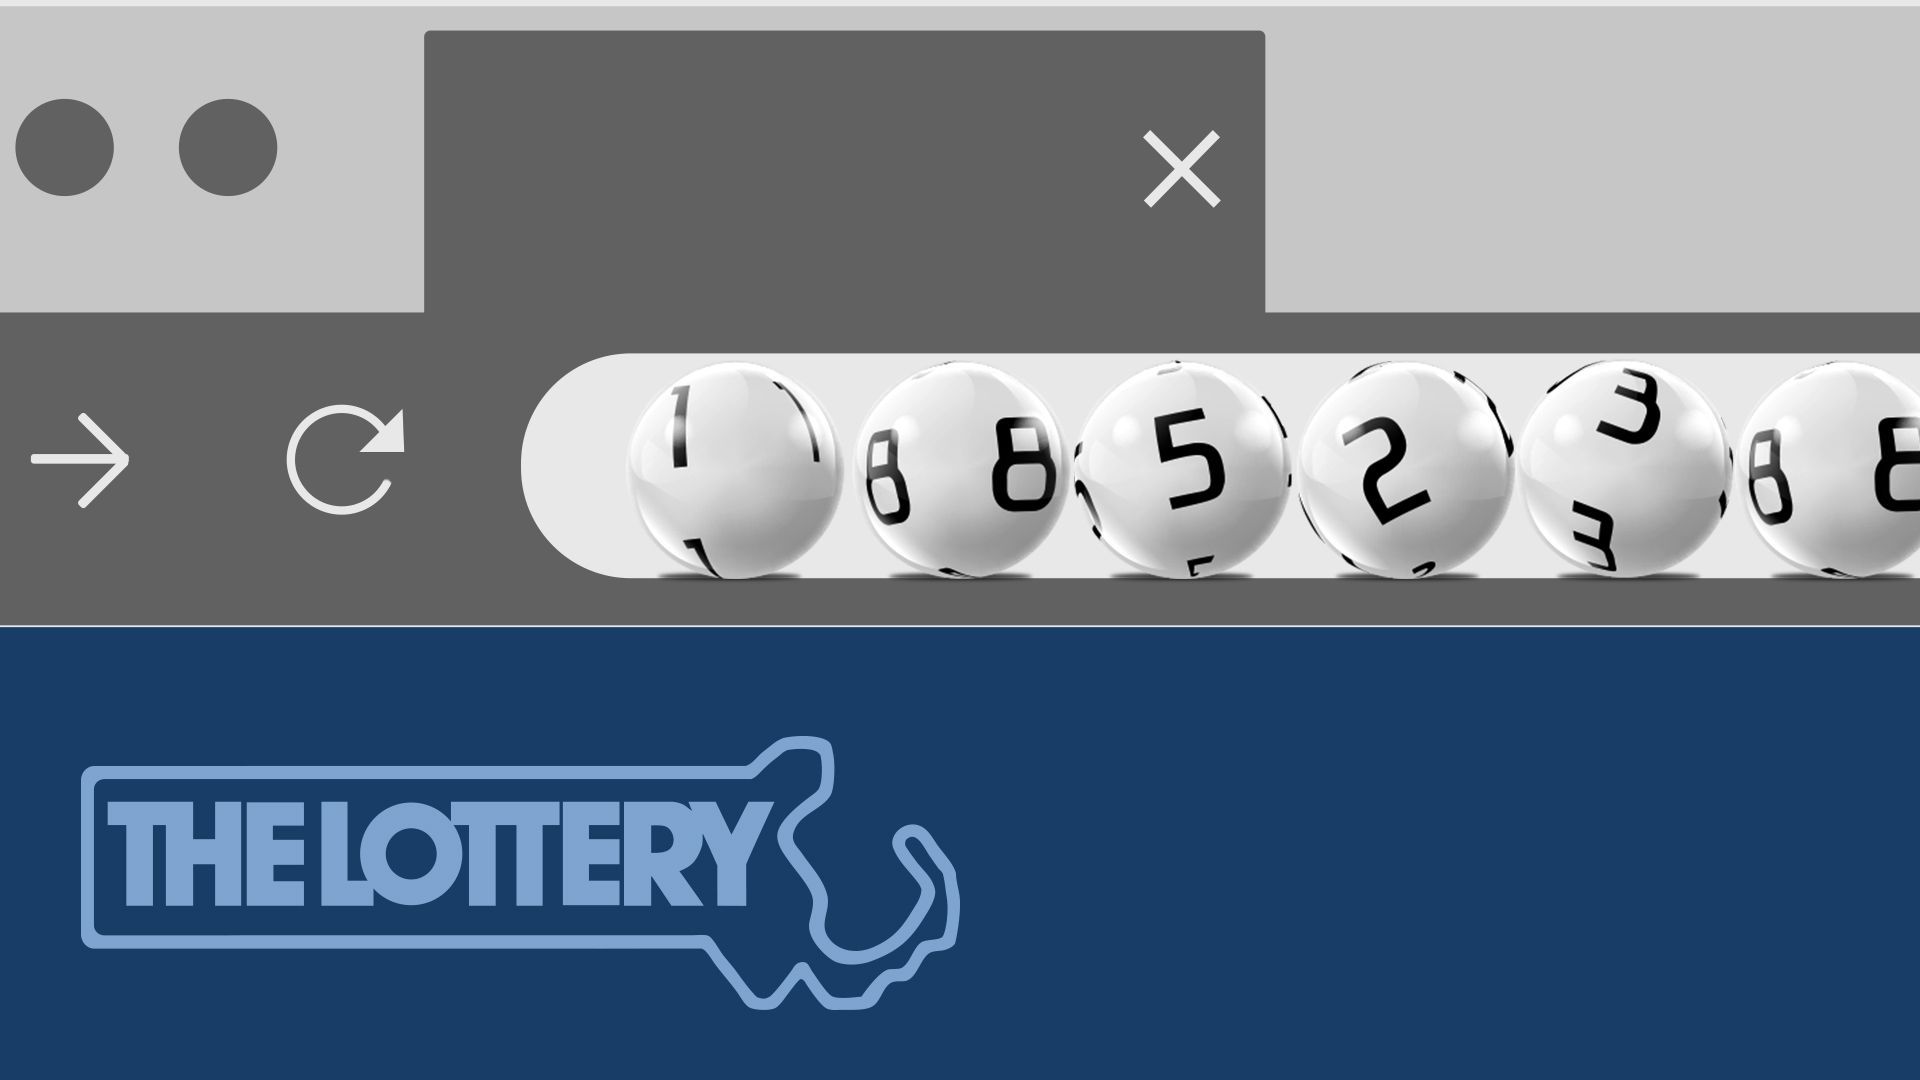 Illustration of lottery balls in the URL field of an internet browser.